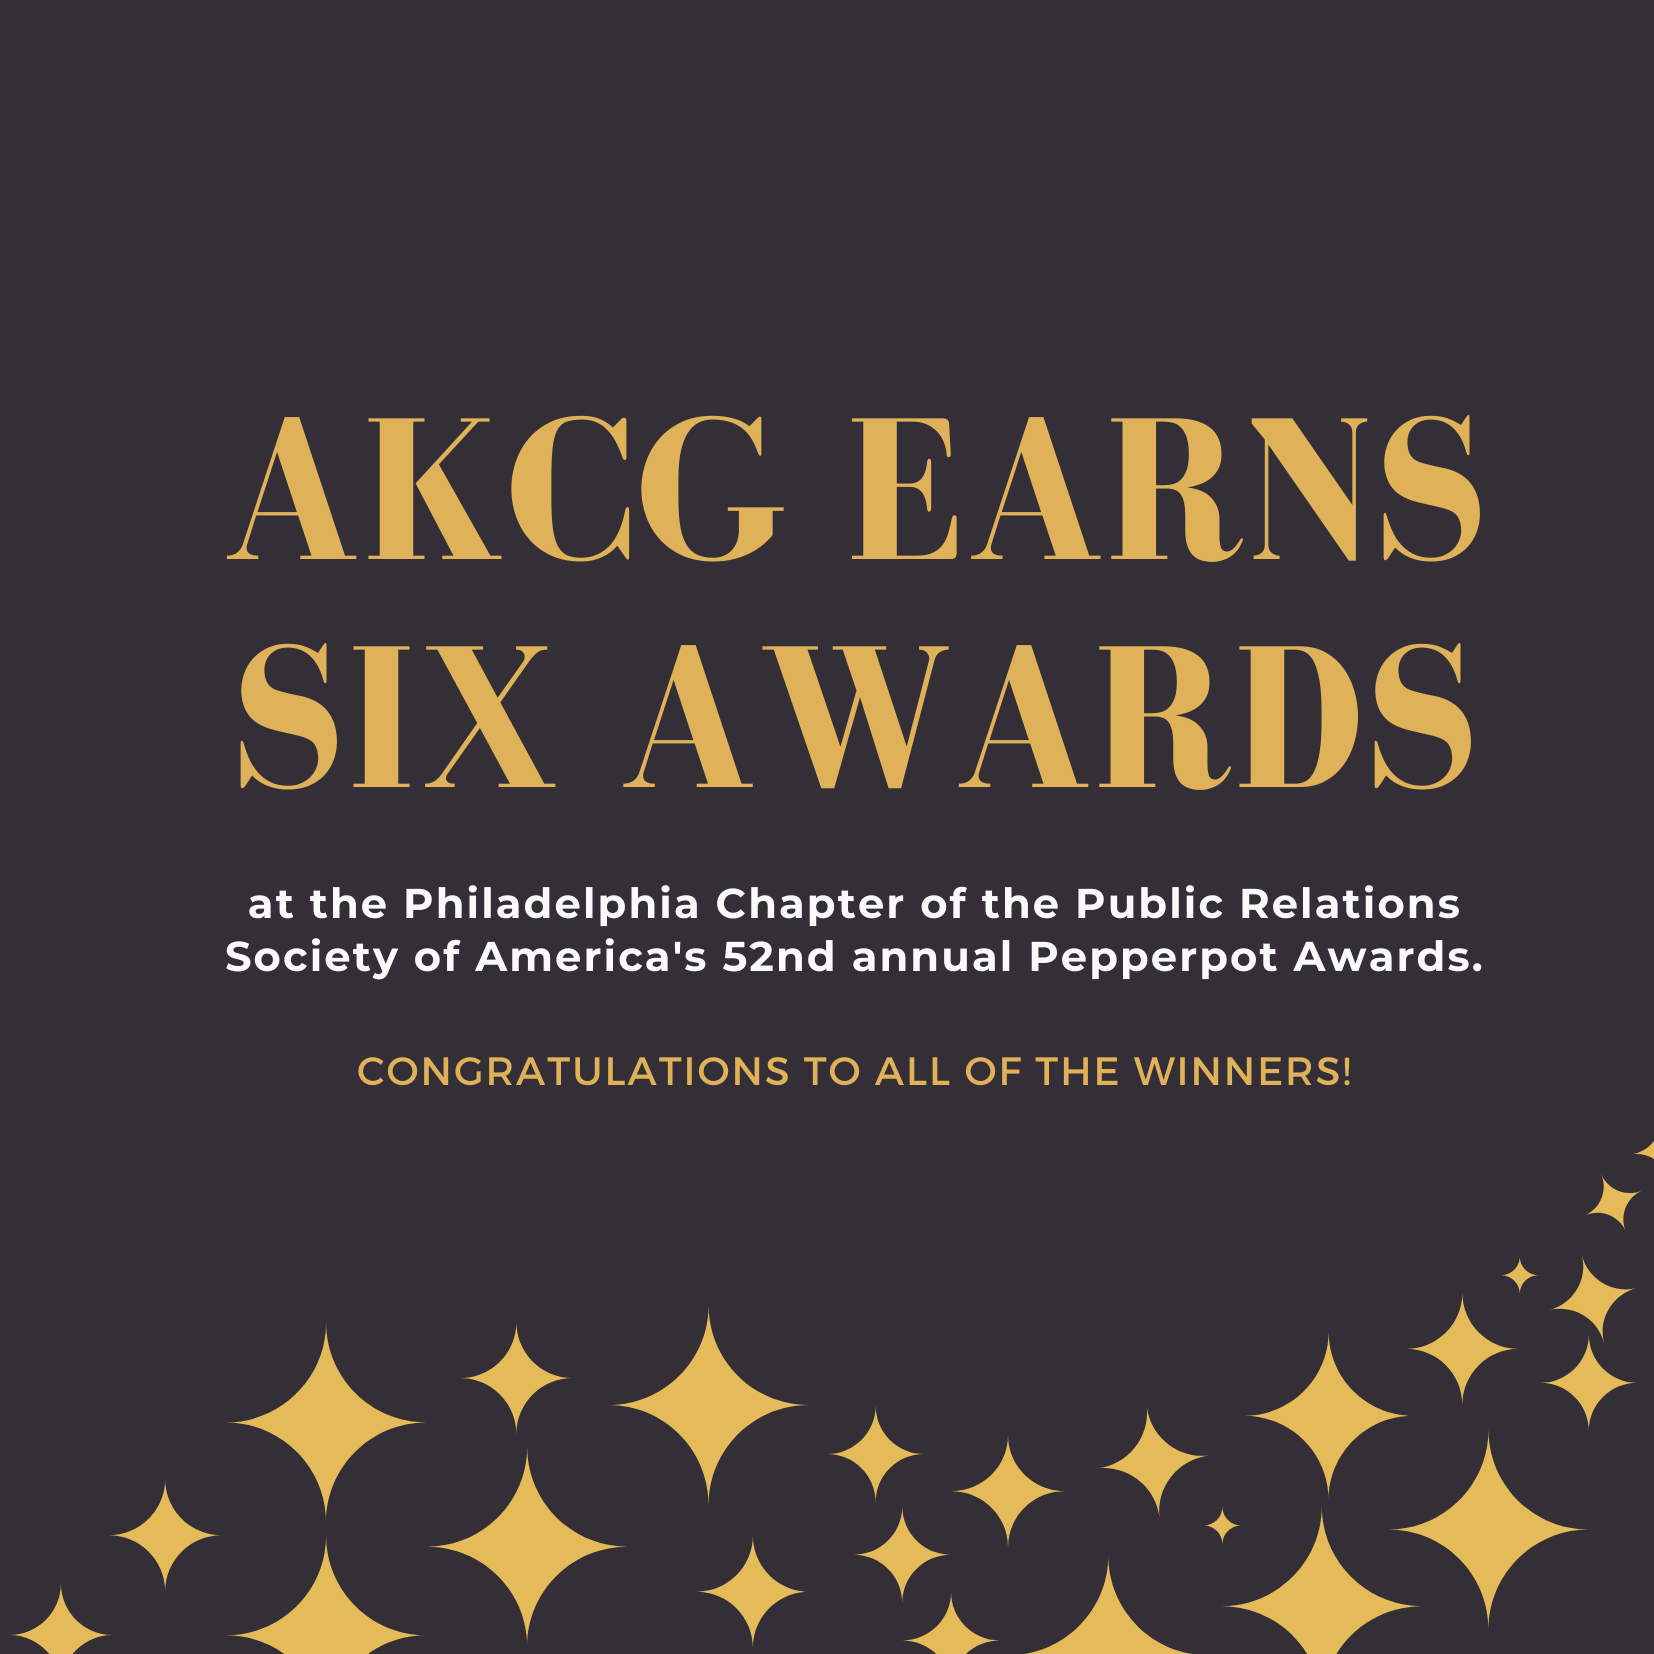 AKCG Earns Six Awards at 52nd Annual Pepperpot Awards